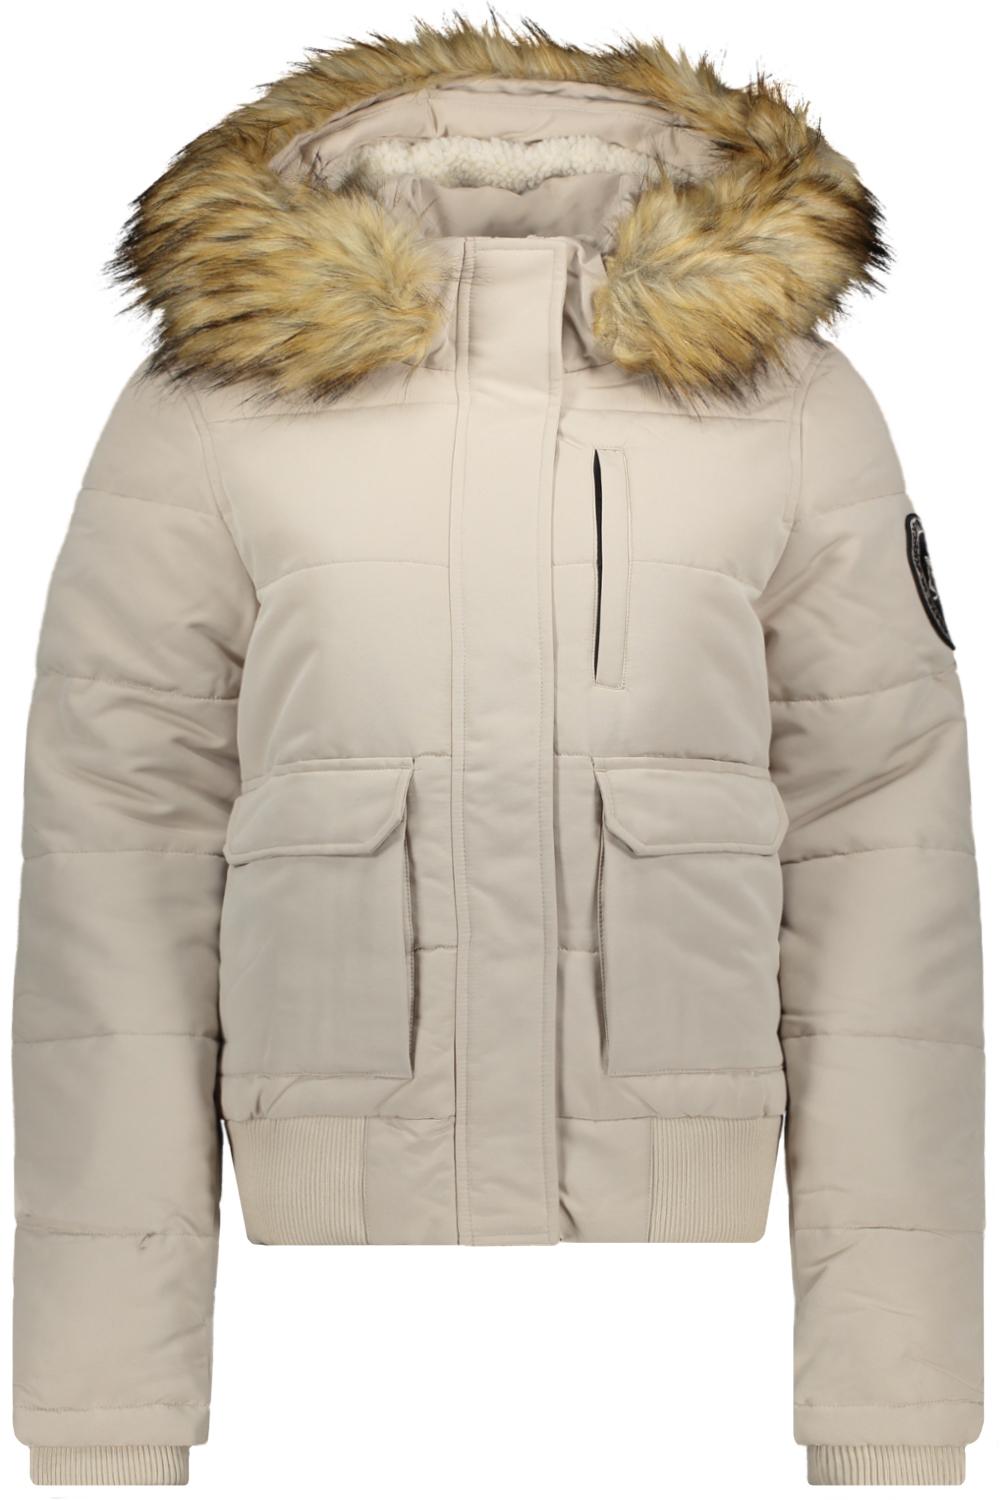 everest grey chateau bomber puffer w5011576a jas 7mo superdry hooded